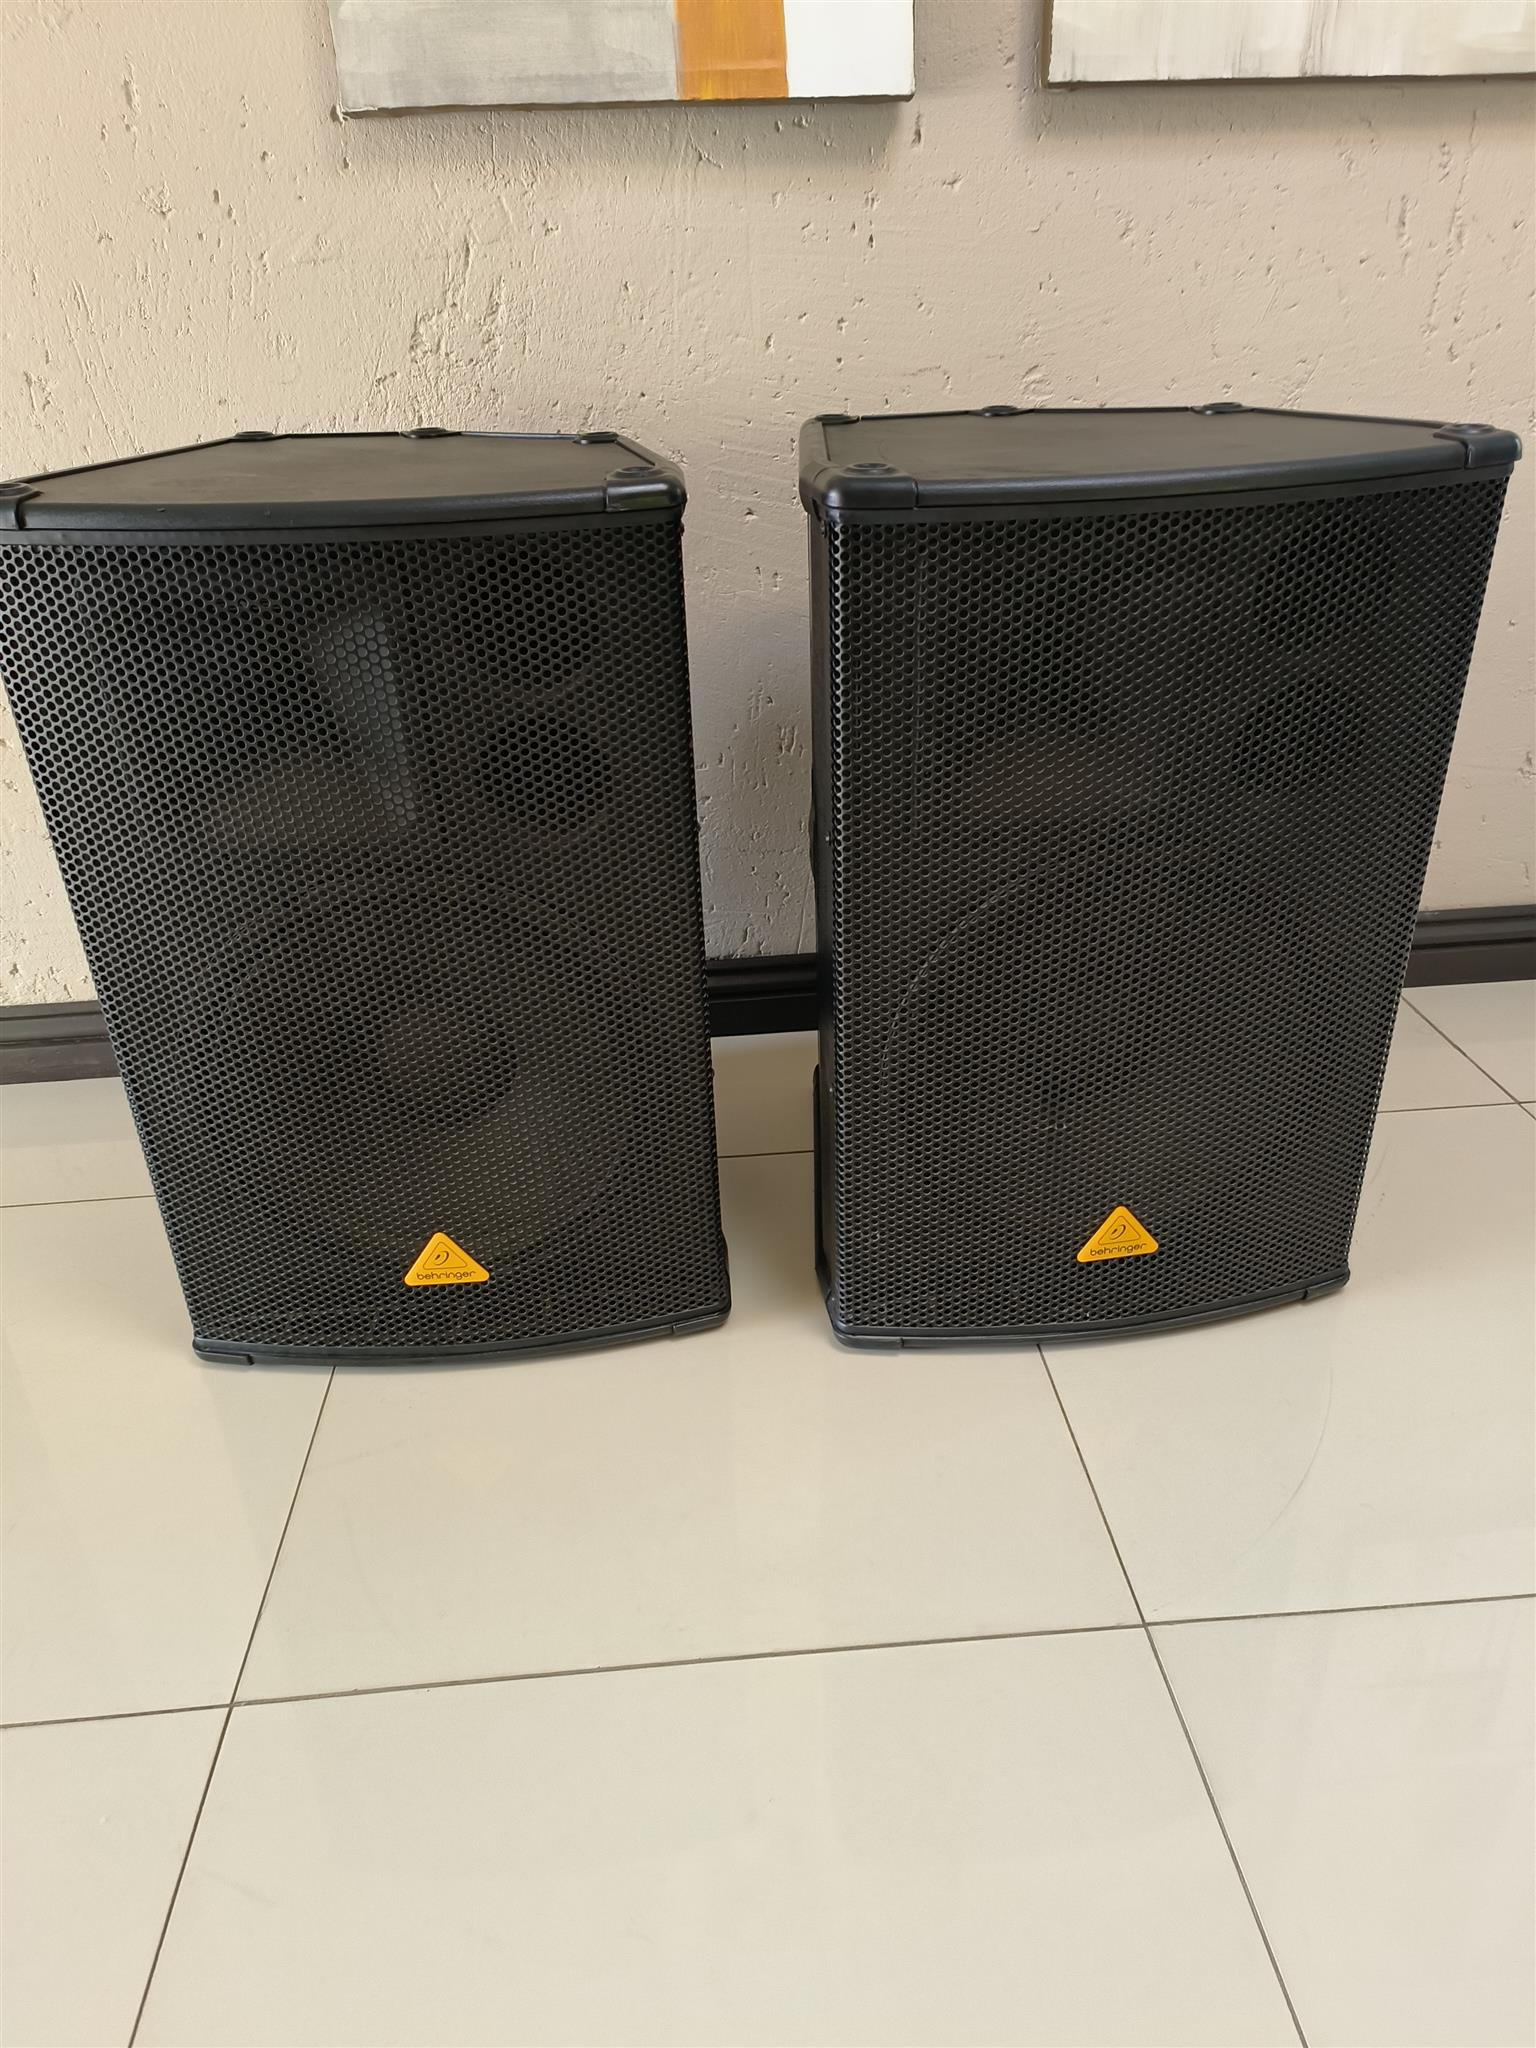 Behringer speakers tops and bass bins